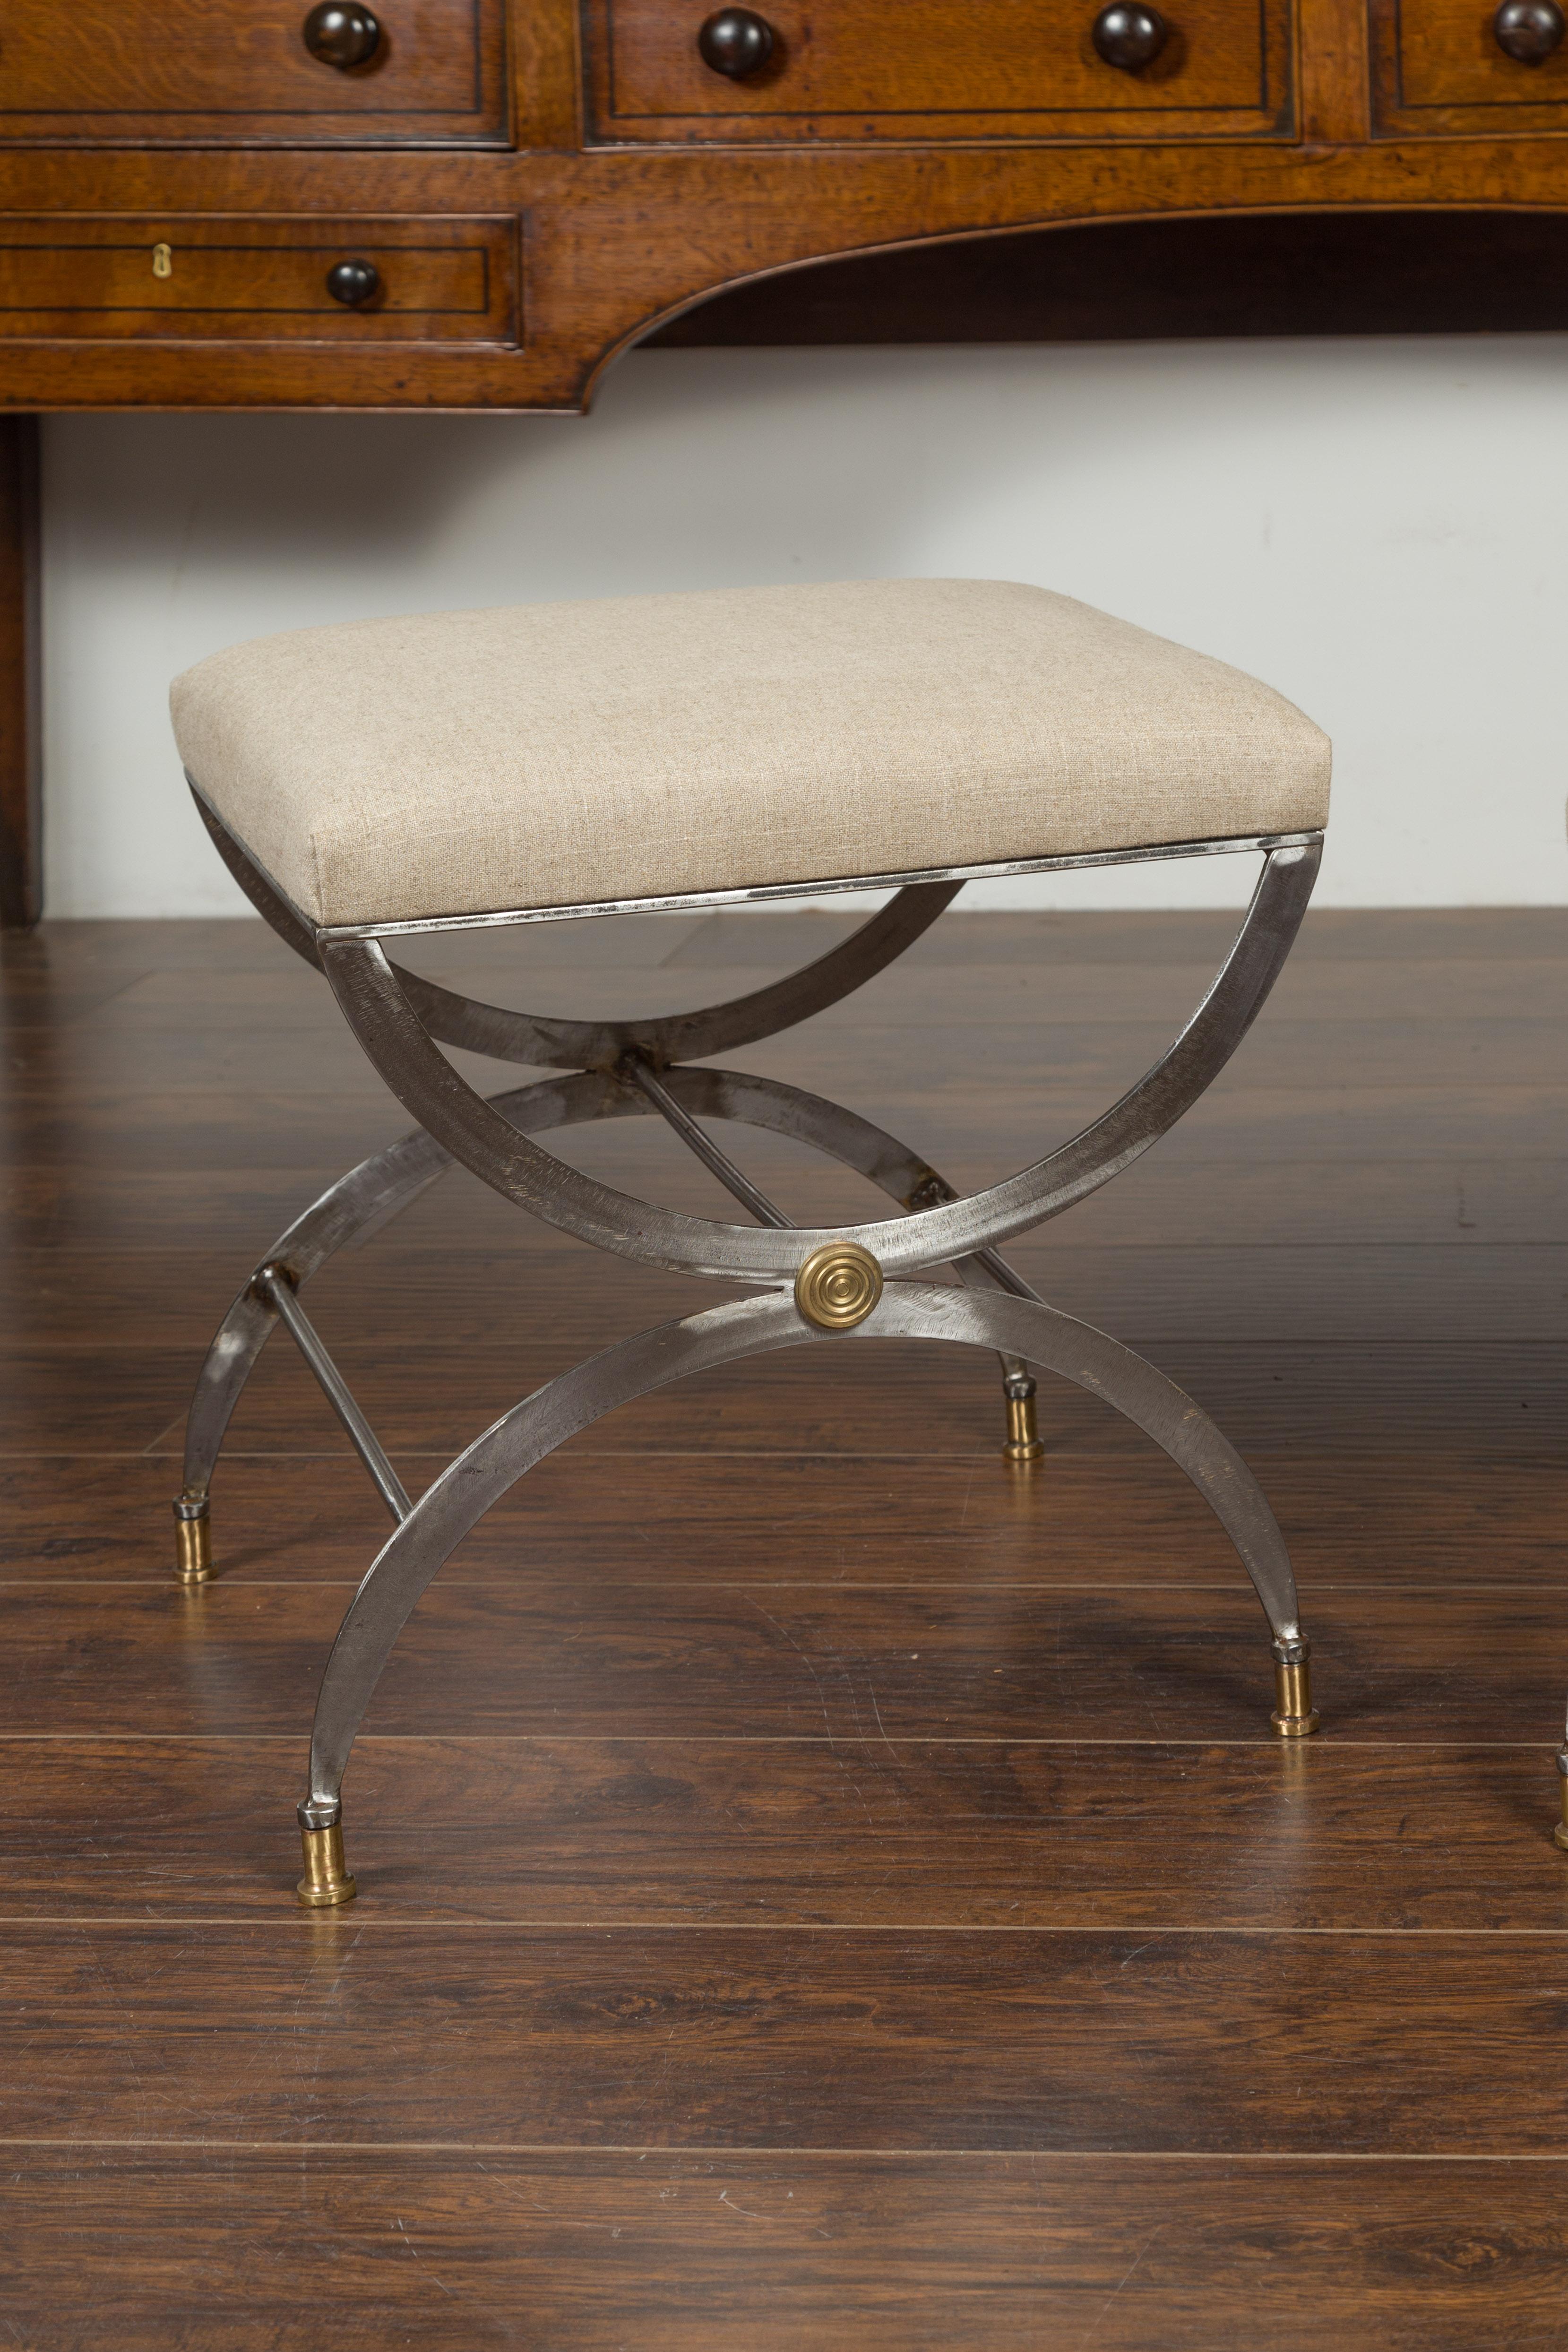 20th Century Pair of Italian Midcentury Steel Curule Stools with Brass Accents and Upholstery